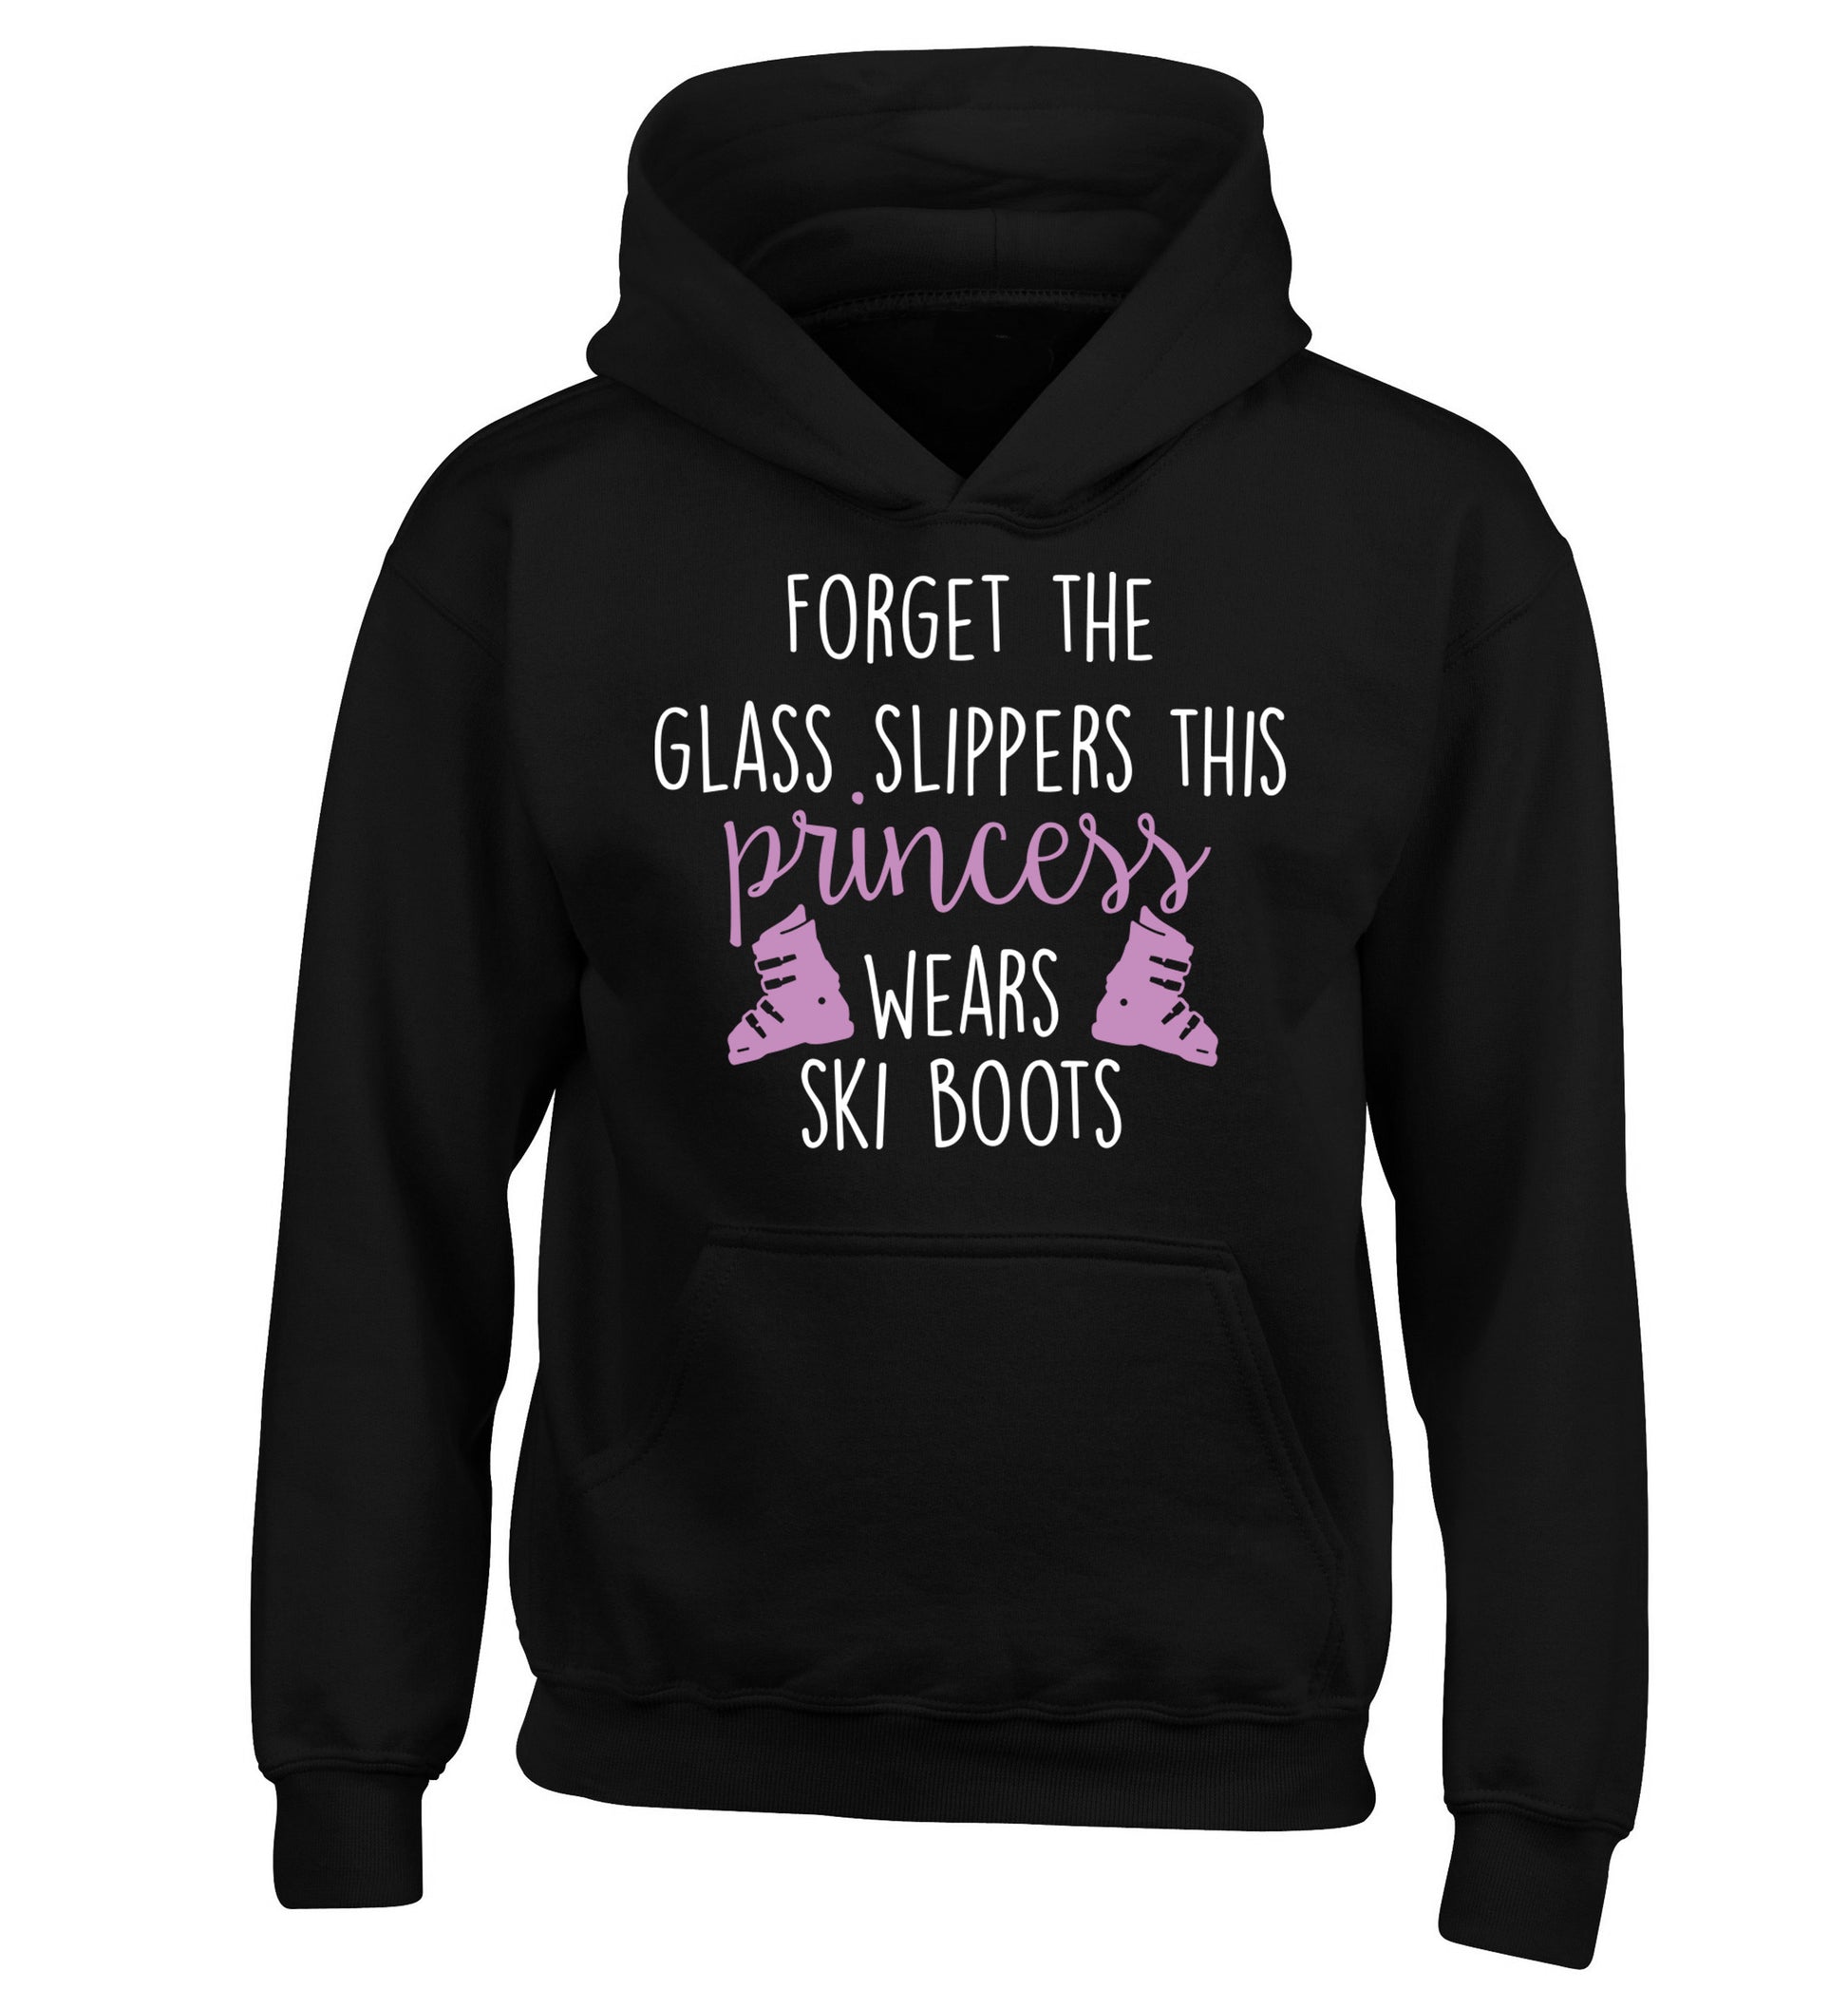 Forget the glass slippers this princess wears ski boots children's black hoodie 12-14 Years